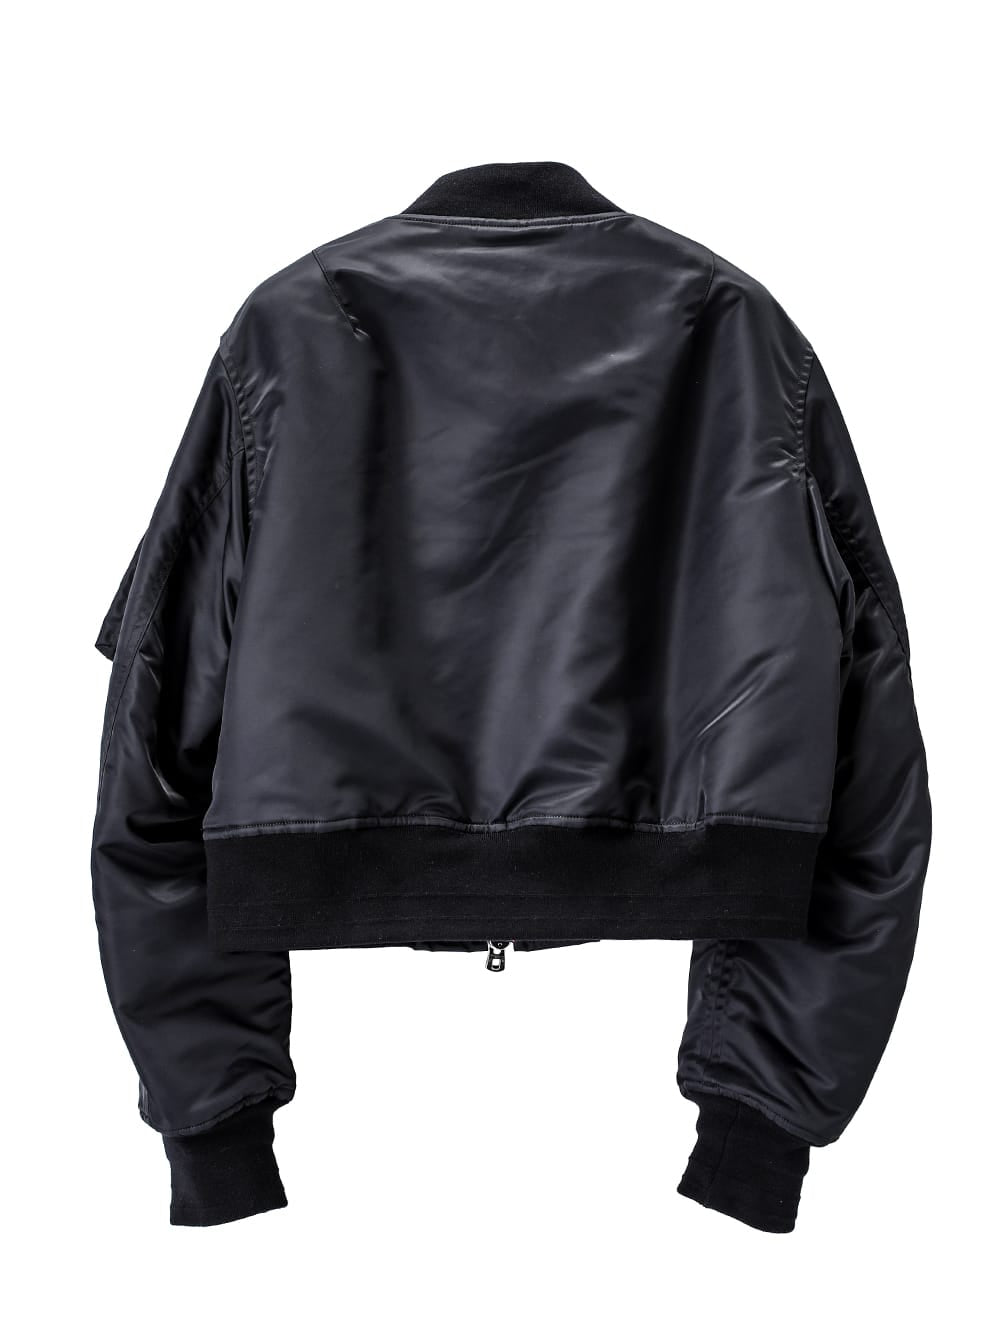 sj.0018bAW23-black two-way cropped bomber jacket. THE TWO OF US 